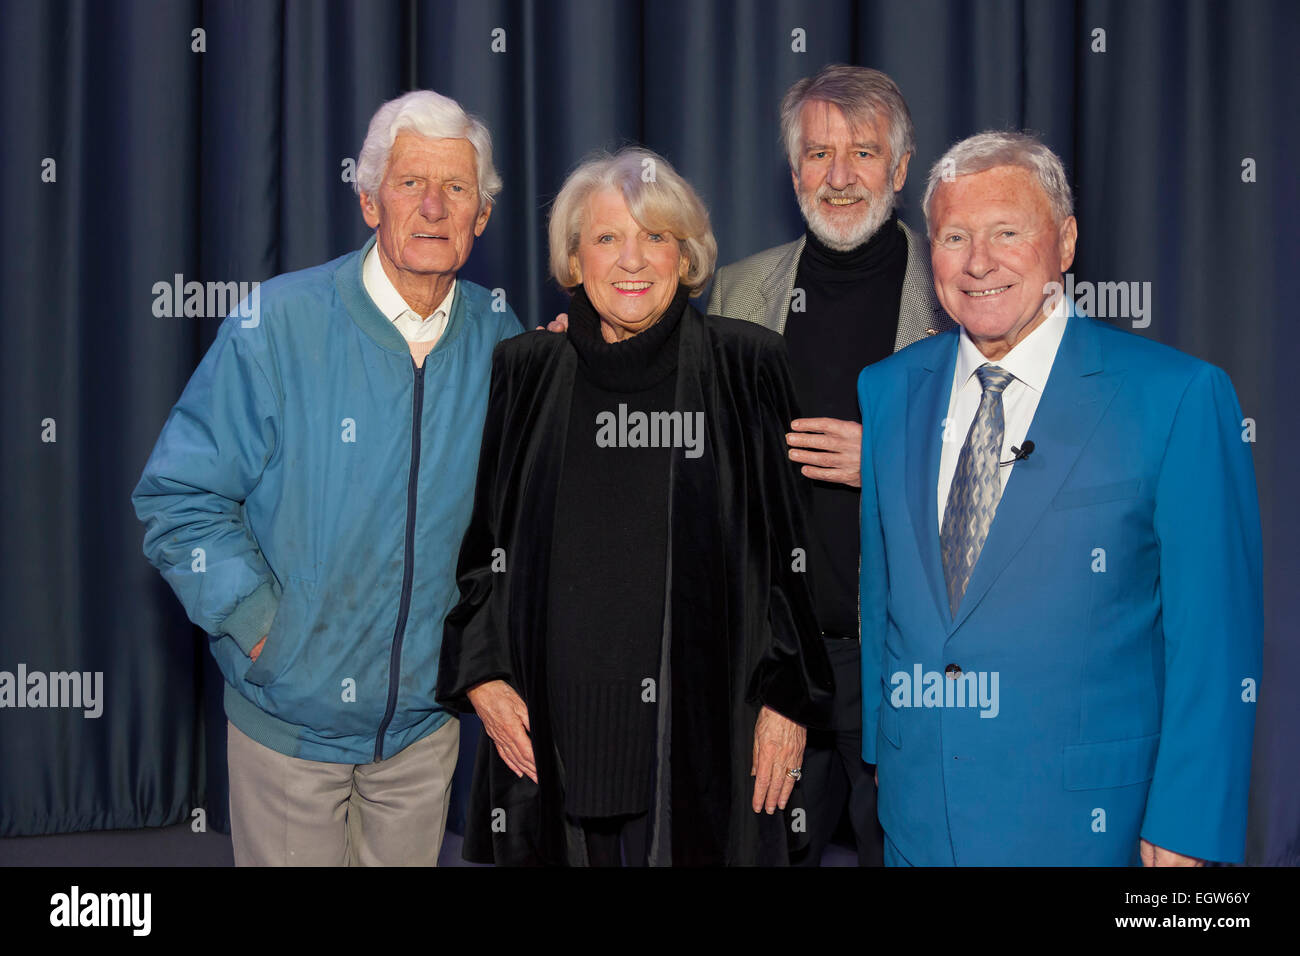 Walsall, West Midlands, UK. 2 March 2015. L to R: Veteran DJ and broadcaster Pete Murray, singer songwriter Jackie Trent, broadcaster Ed ‘Stewpot Stewart and host David Hamilton at the recording of ‘The David Hamilton Show’, a new weekly television series commencing 3 March 2015 on the new Midlands channel Big Centre TV. Hosted by the well-known presenter and broadcaster ‘Diddy’ David Hamilton the show features famous personalities from across the music and television spectrum. Credit:  John Henshall/Alamy Live News PER0485 Stock Photo